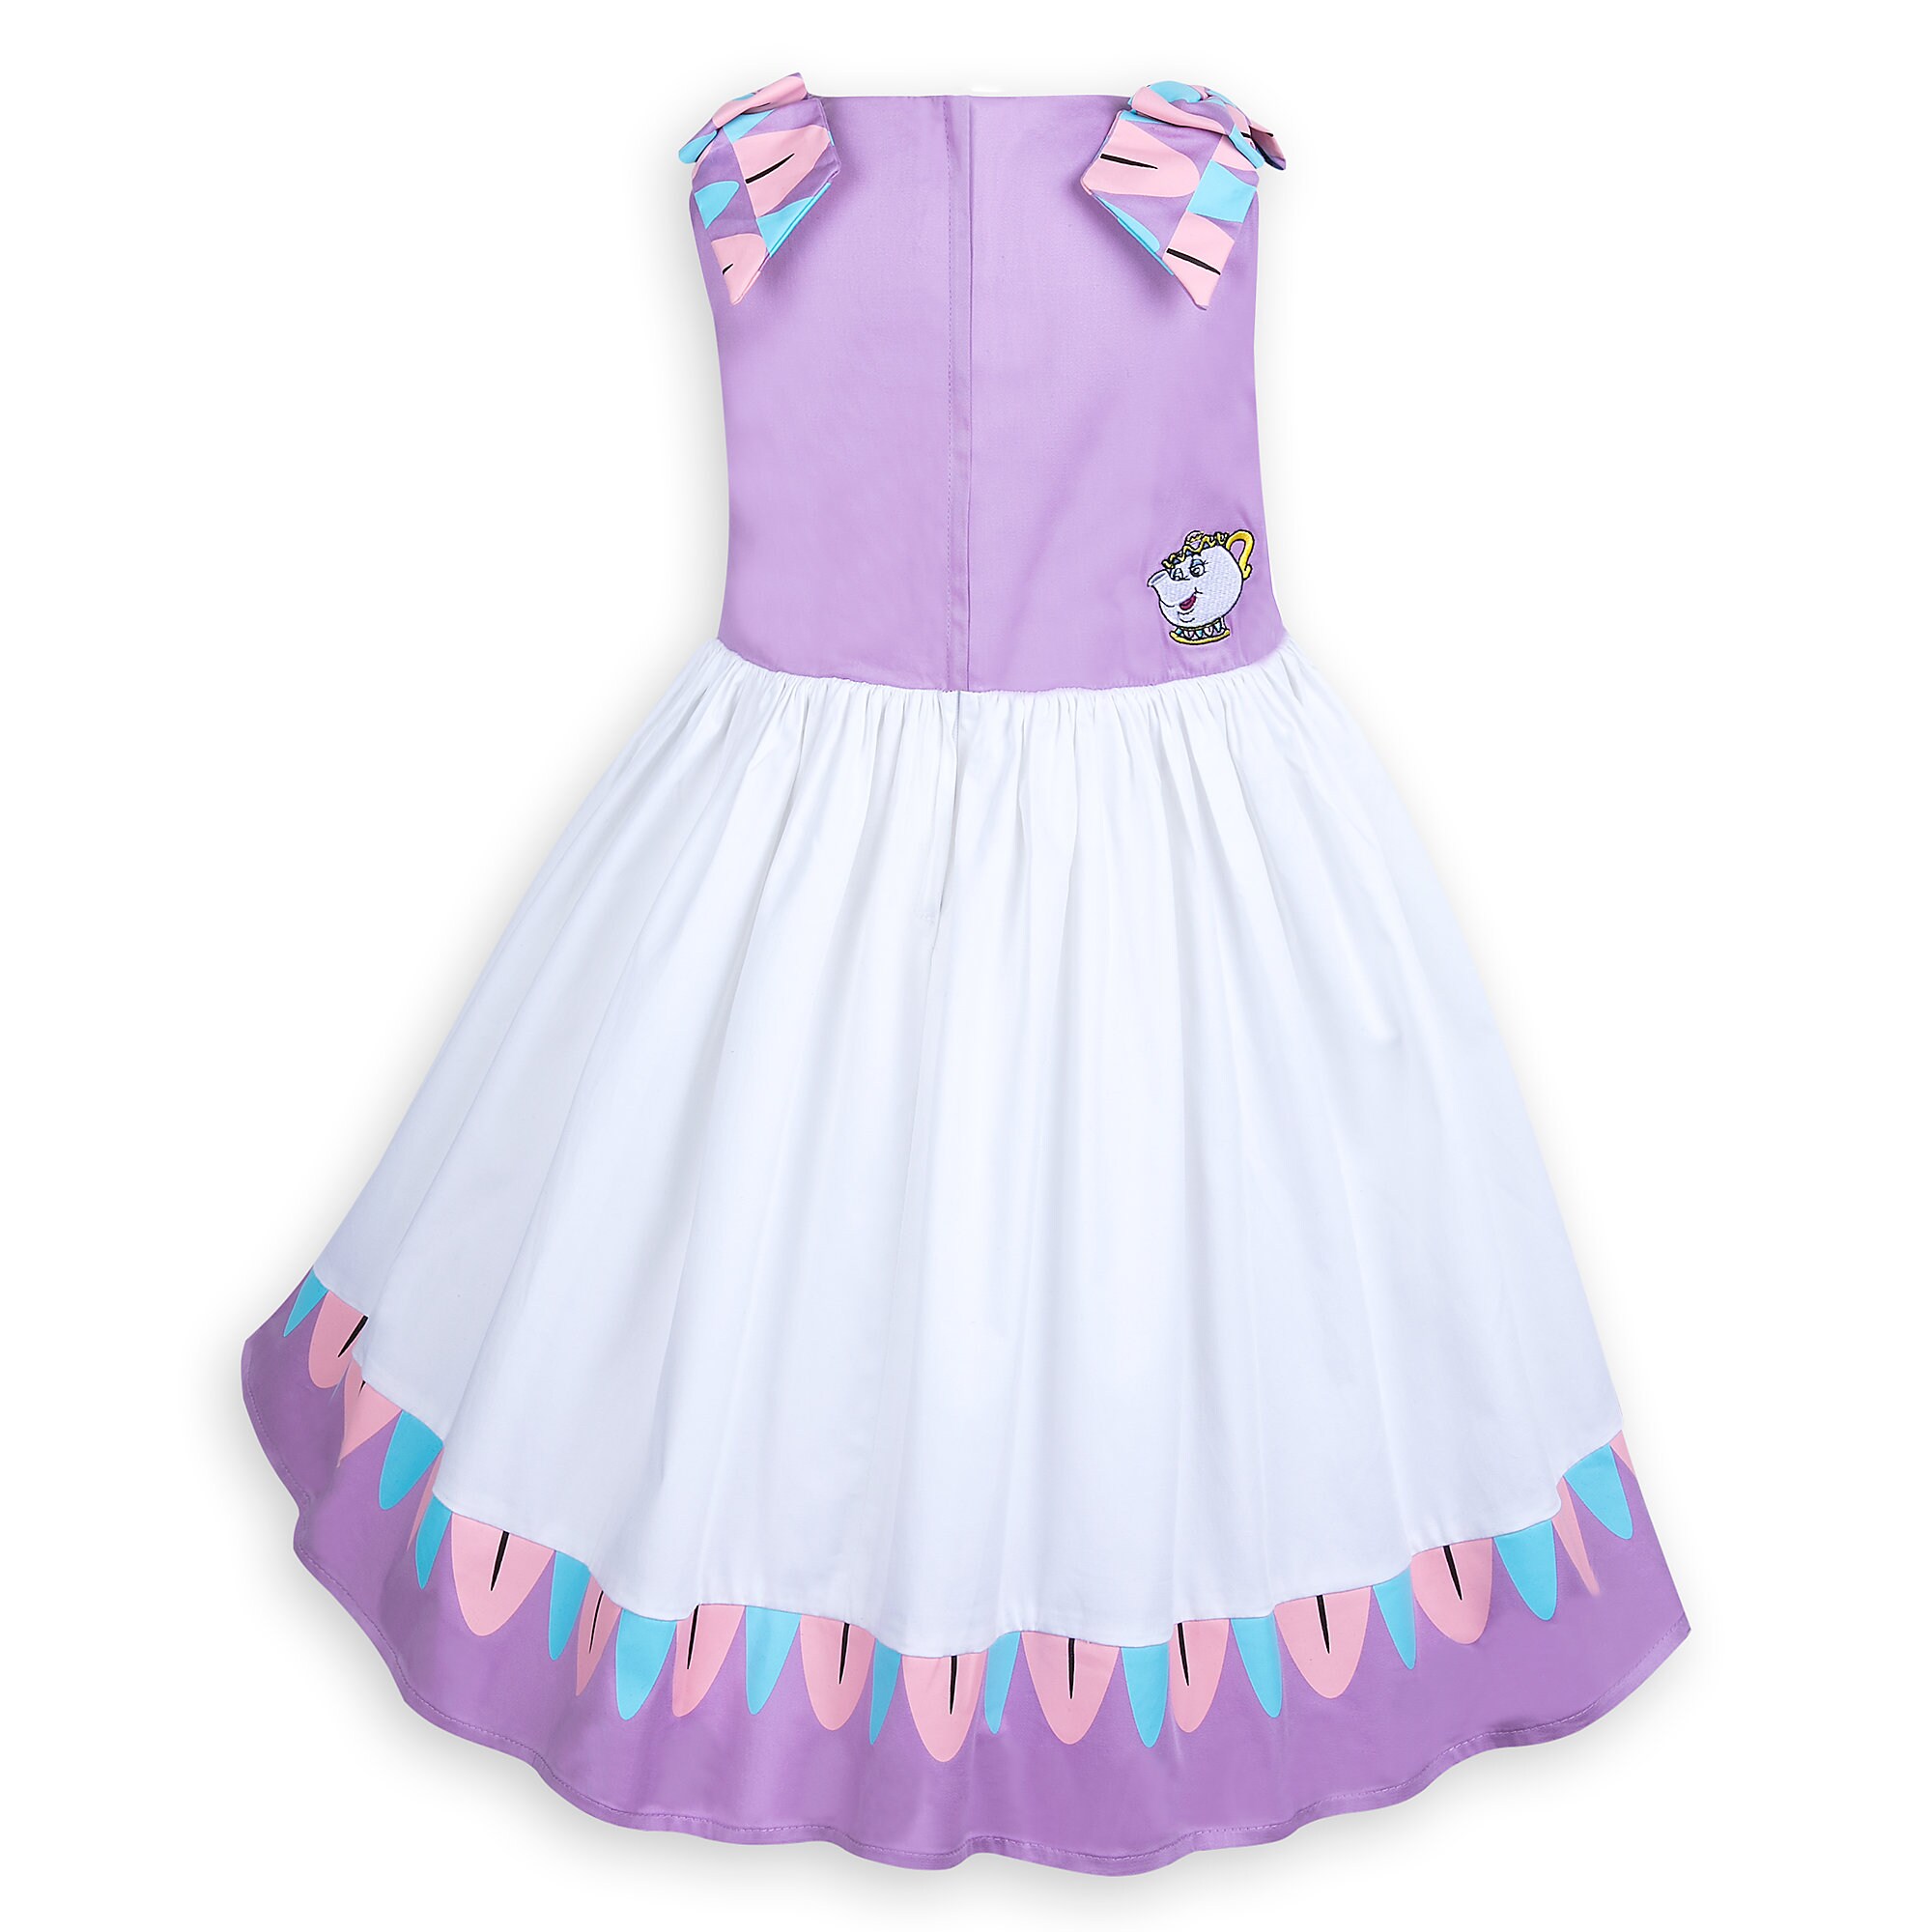 Mrs. Potts and Chip Dress for Girls - Beauty and the Beast